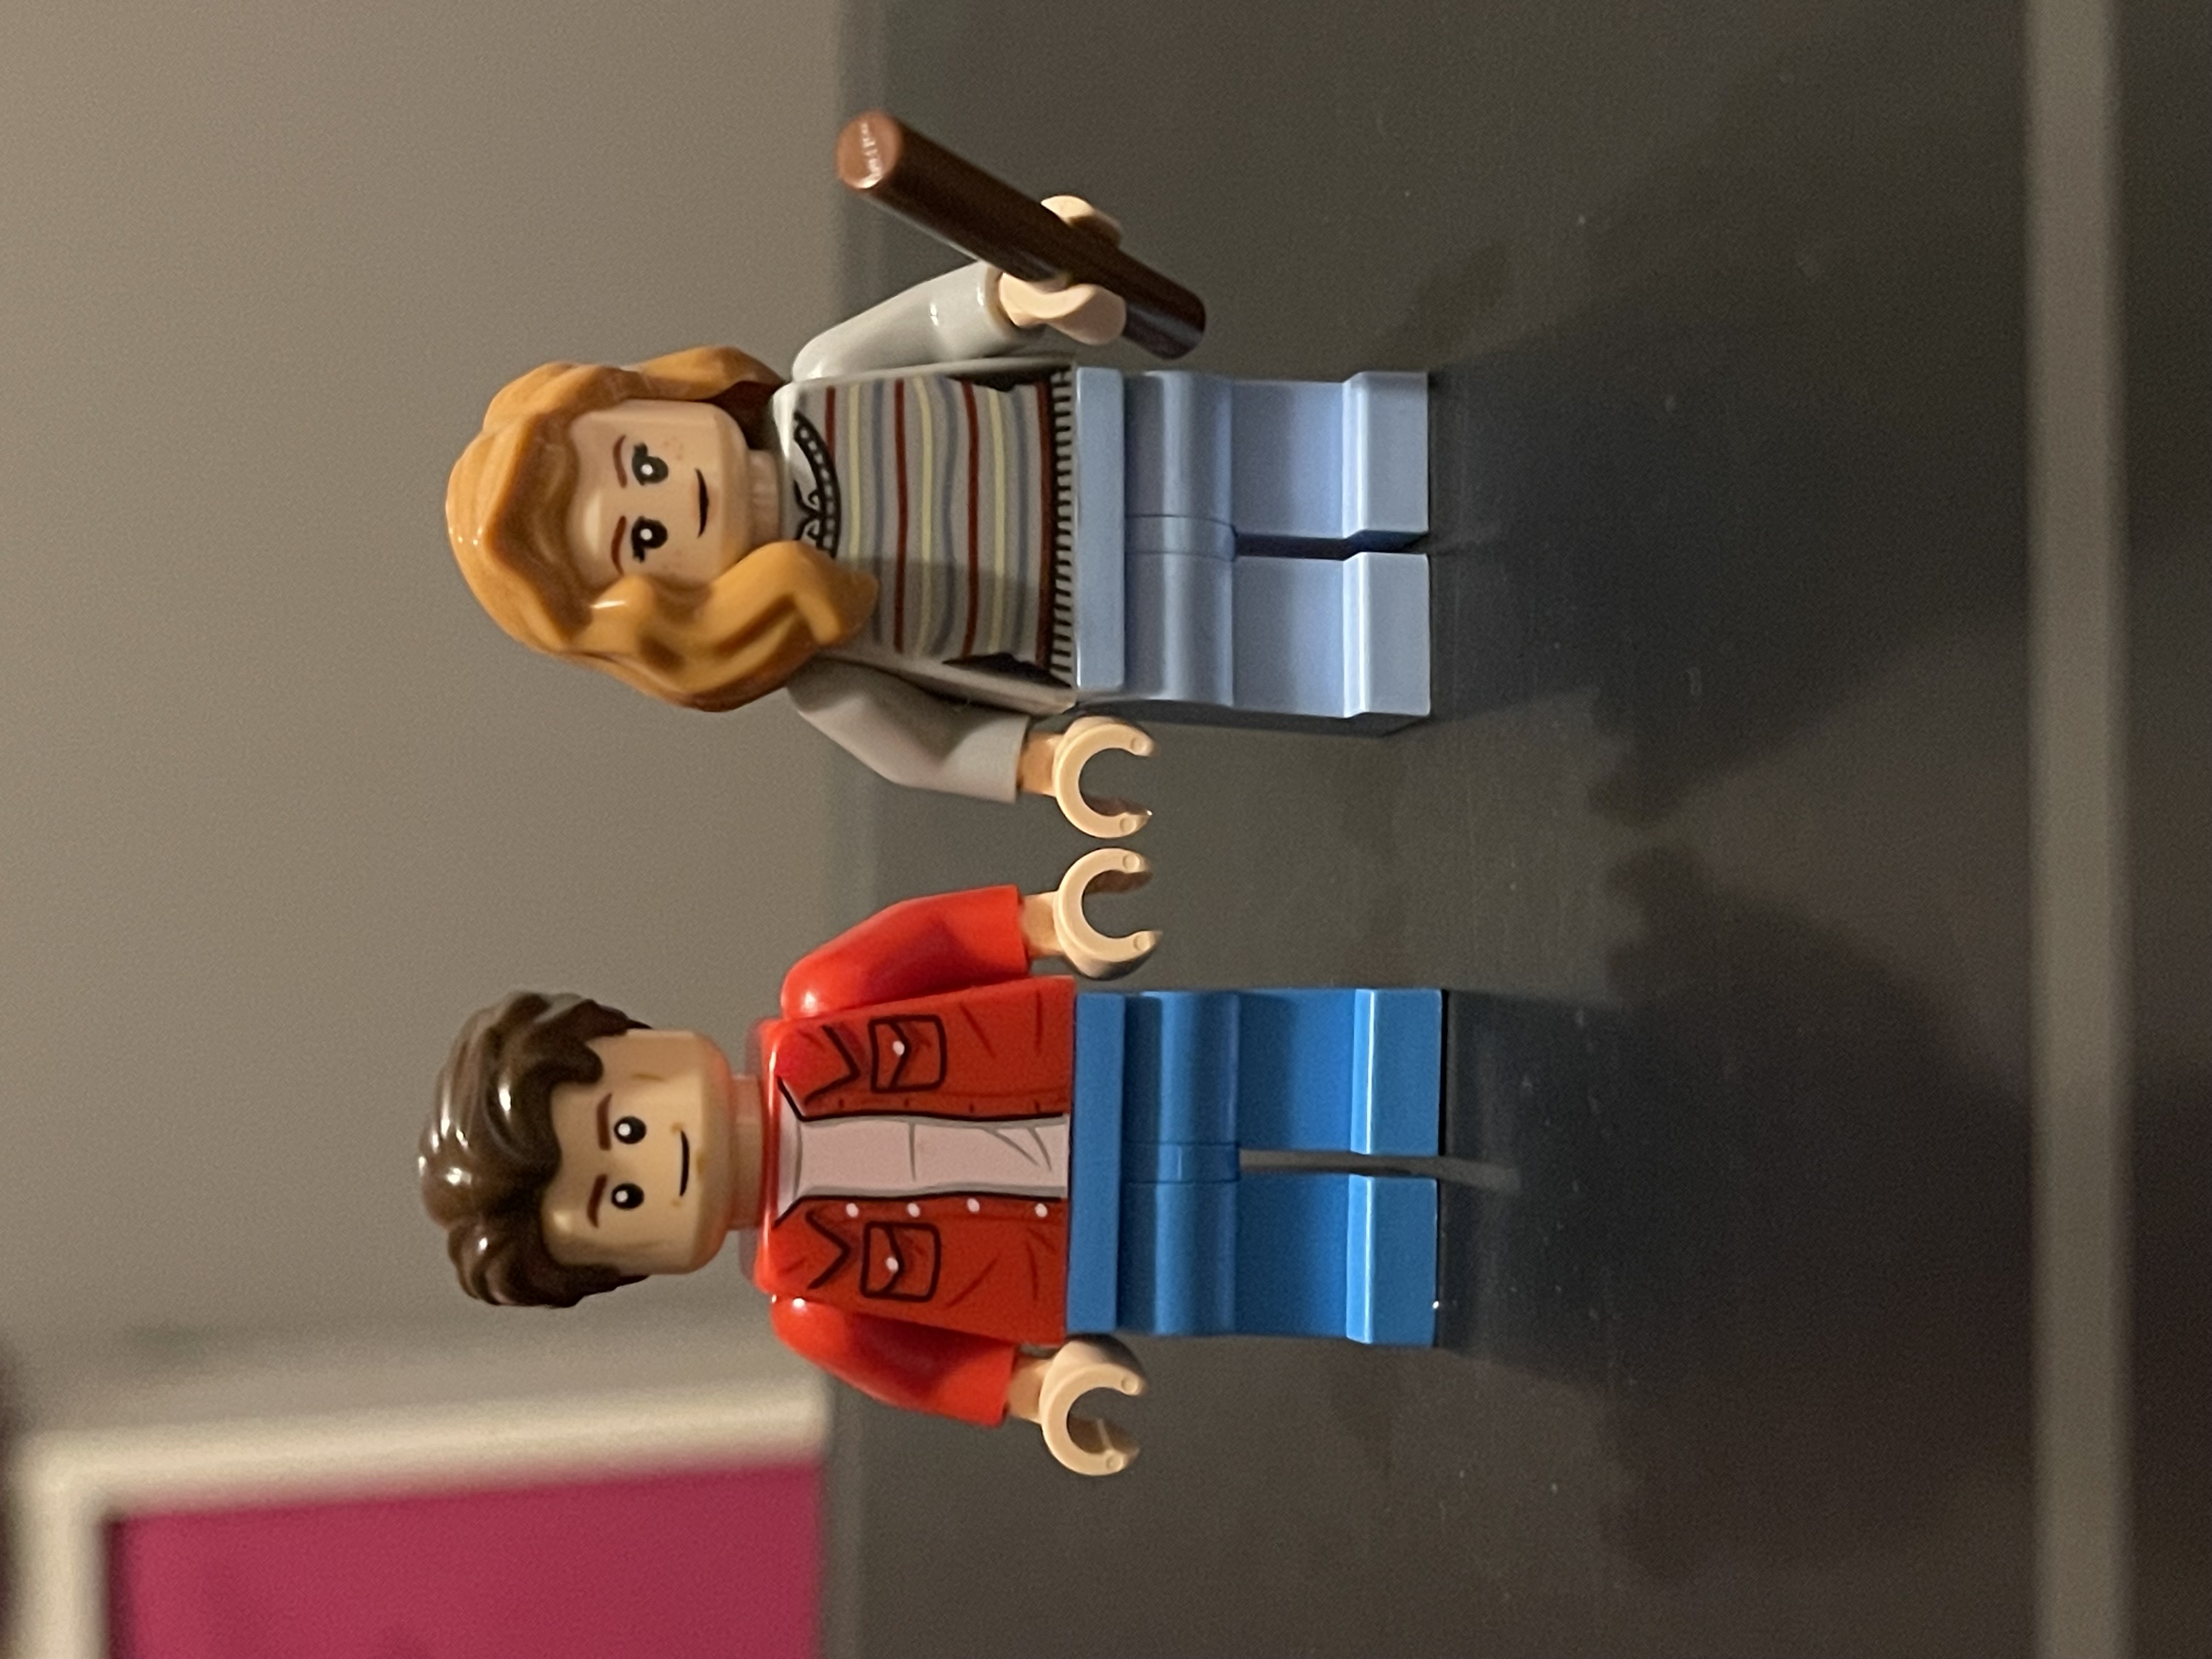 LEGO Marty McFly and Hermione Granger by mlpsgirl on DeviantArt